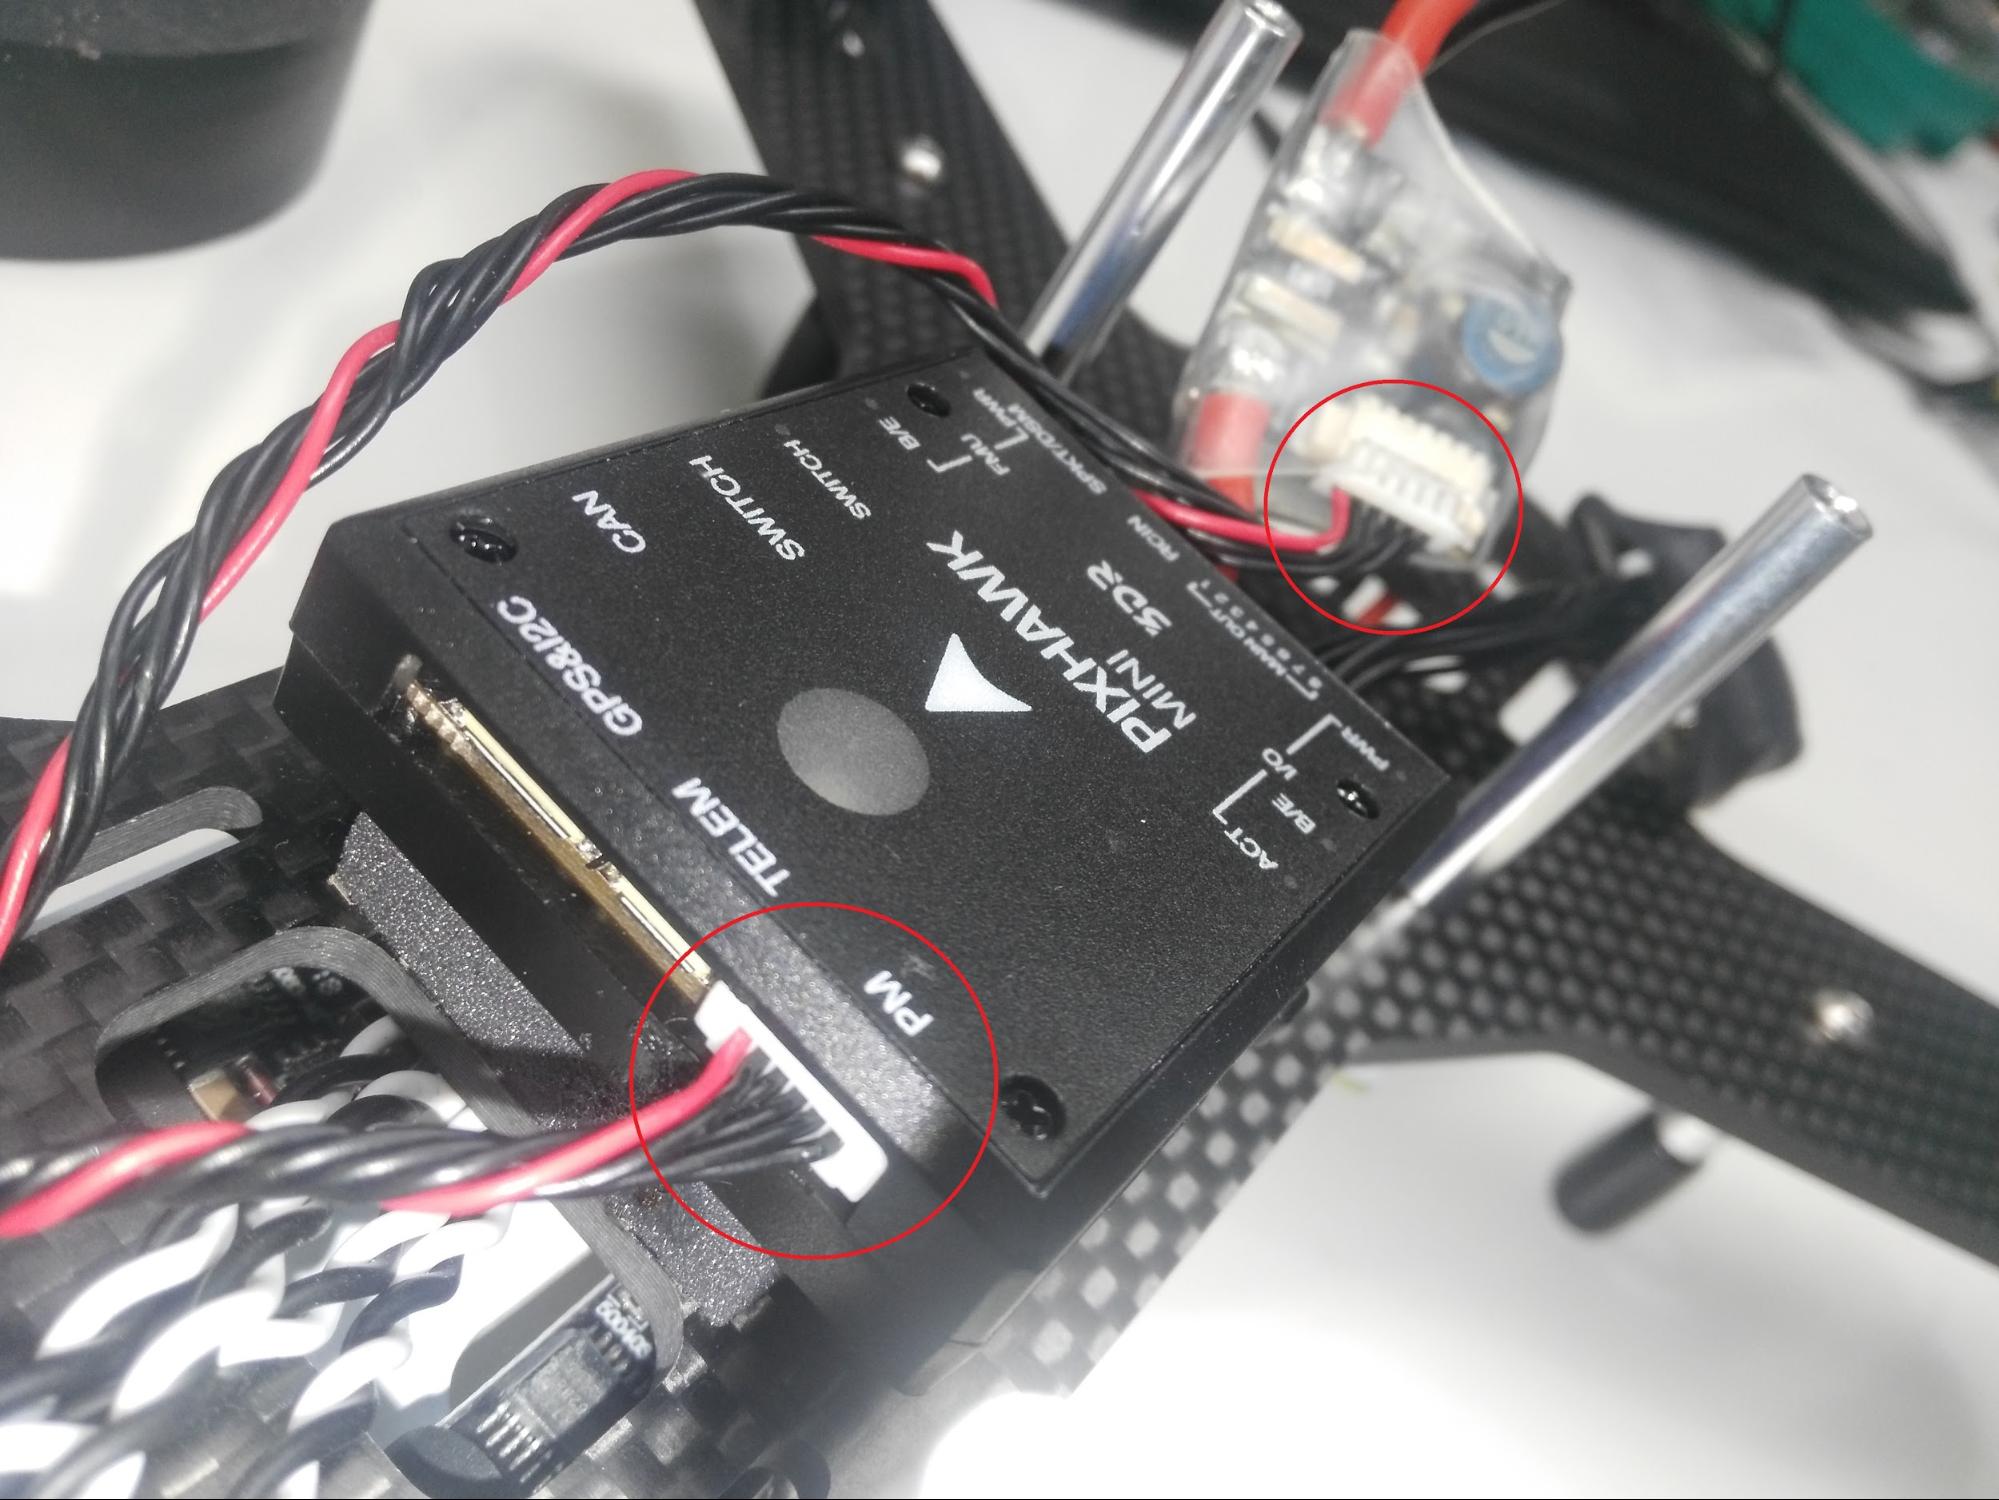 Connect the Pixhawk Mini to the power module